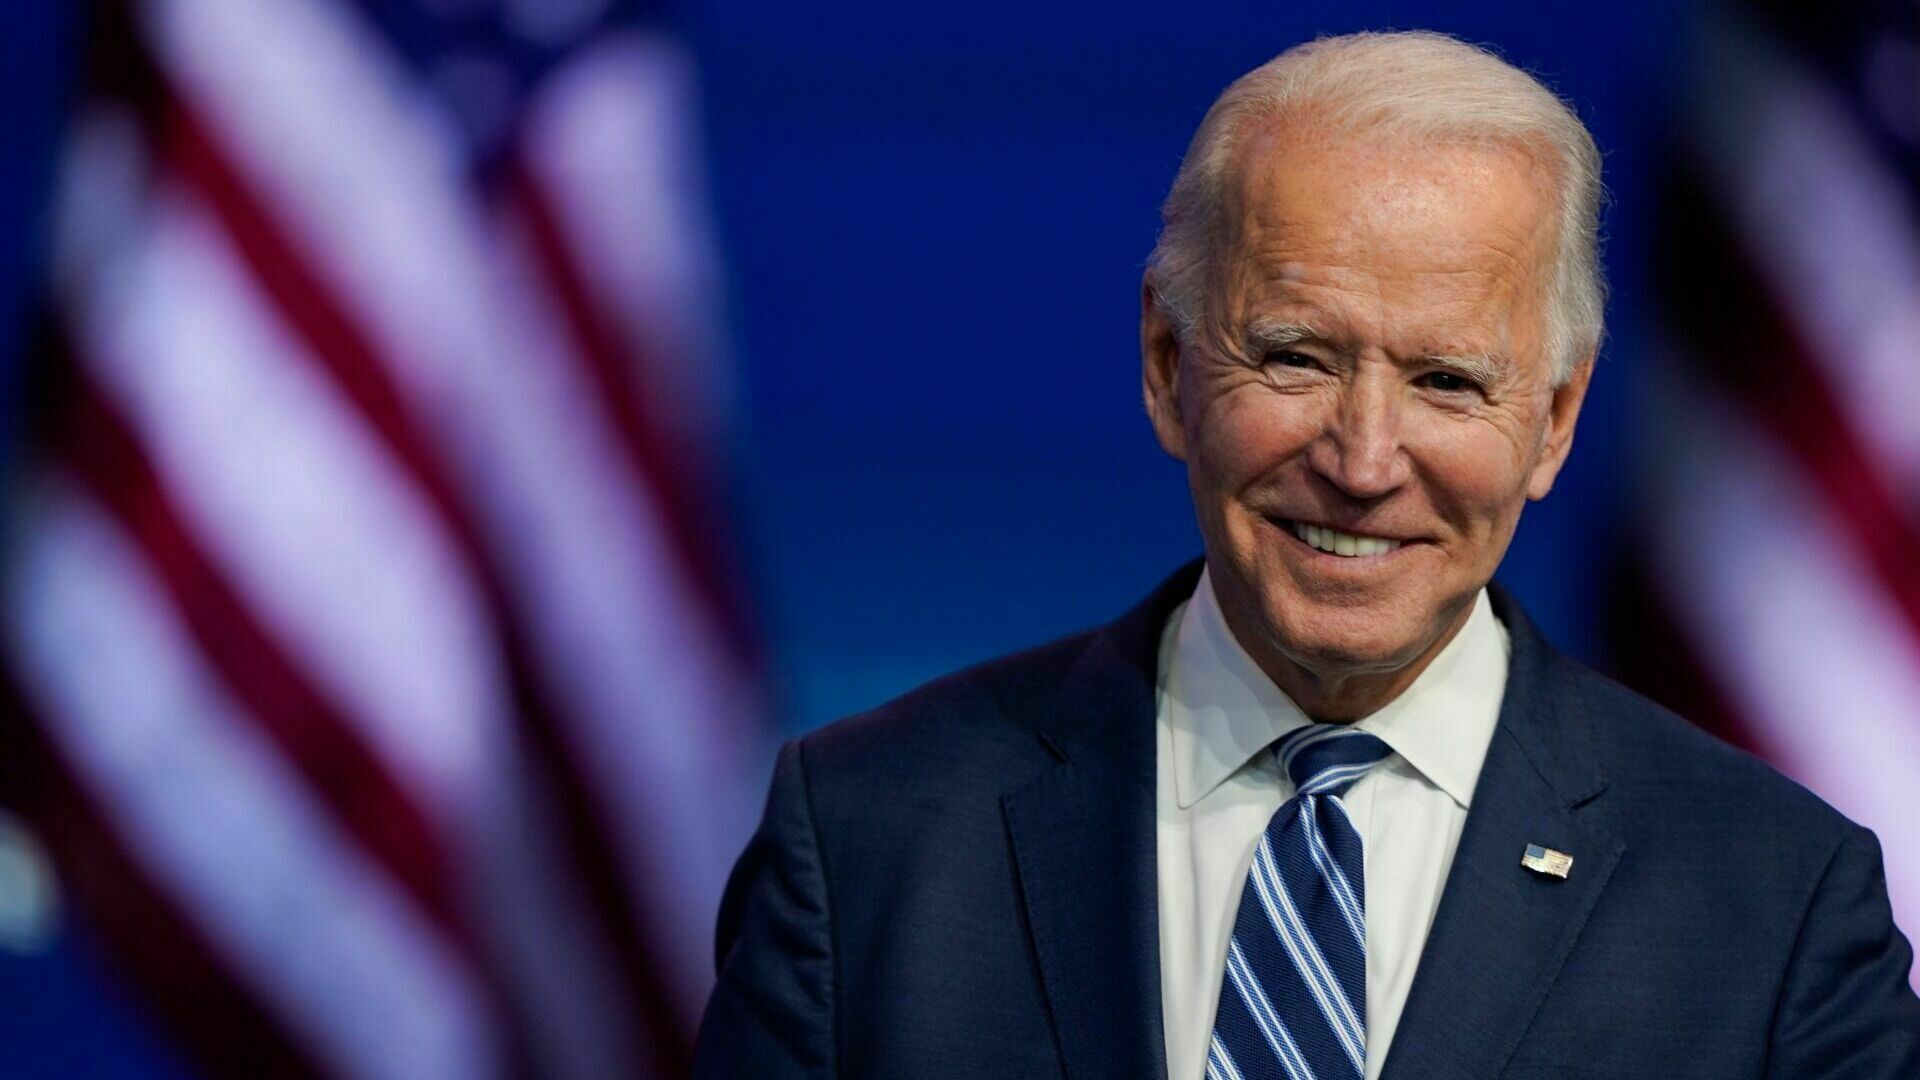 Biden has decided to run for president, but will not officially announce it until the summer